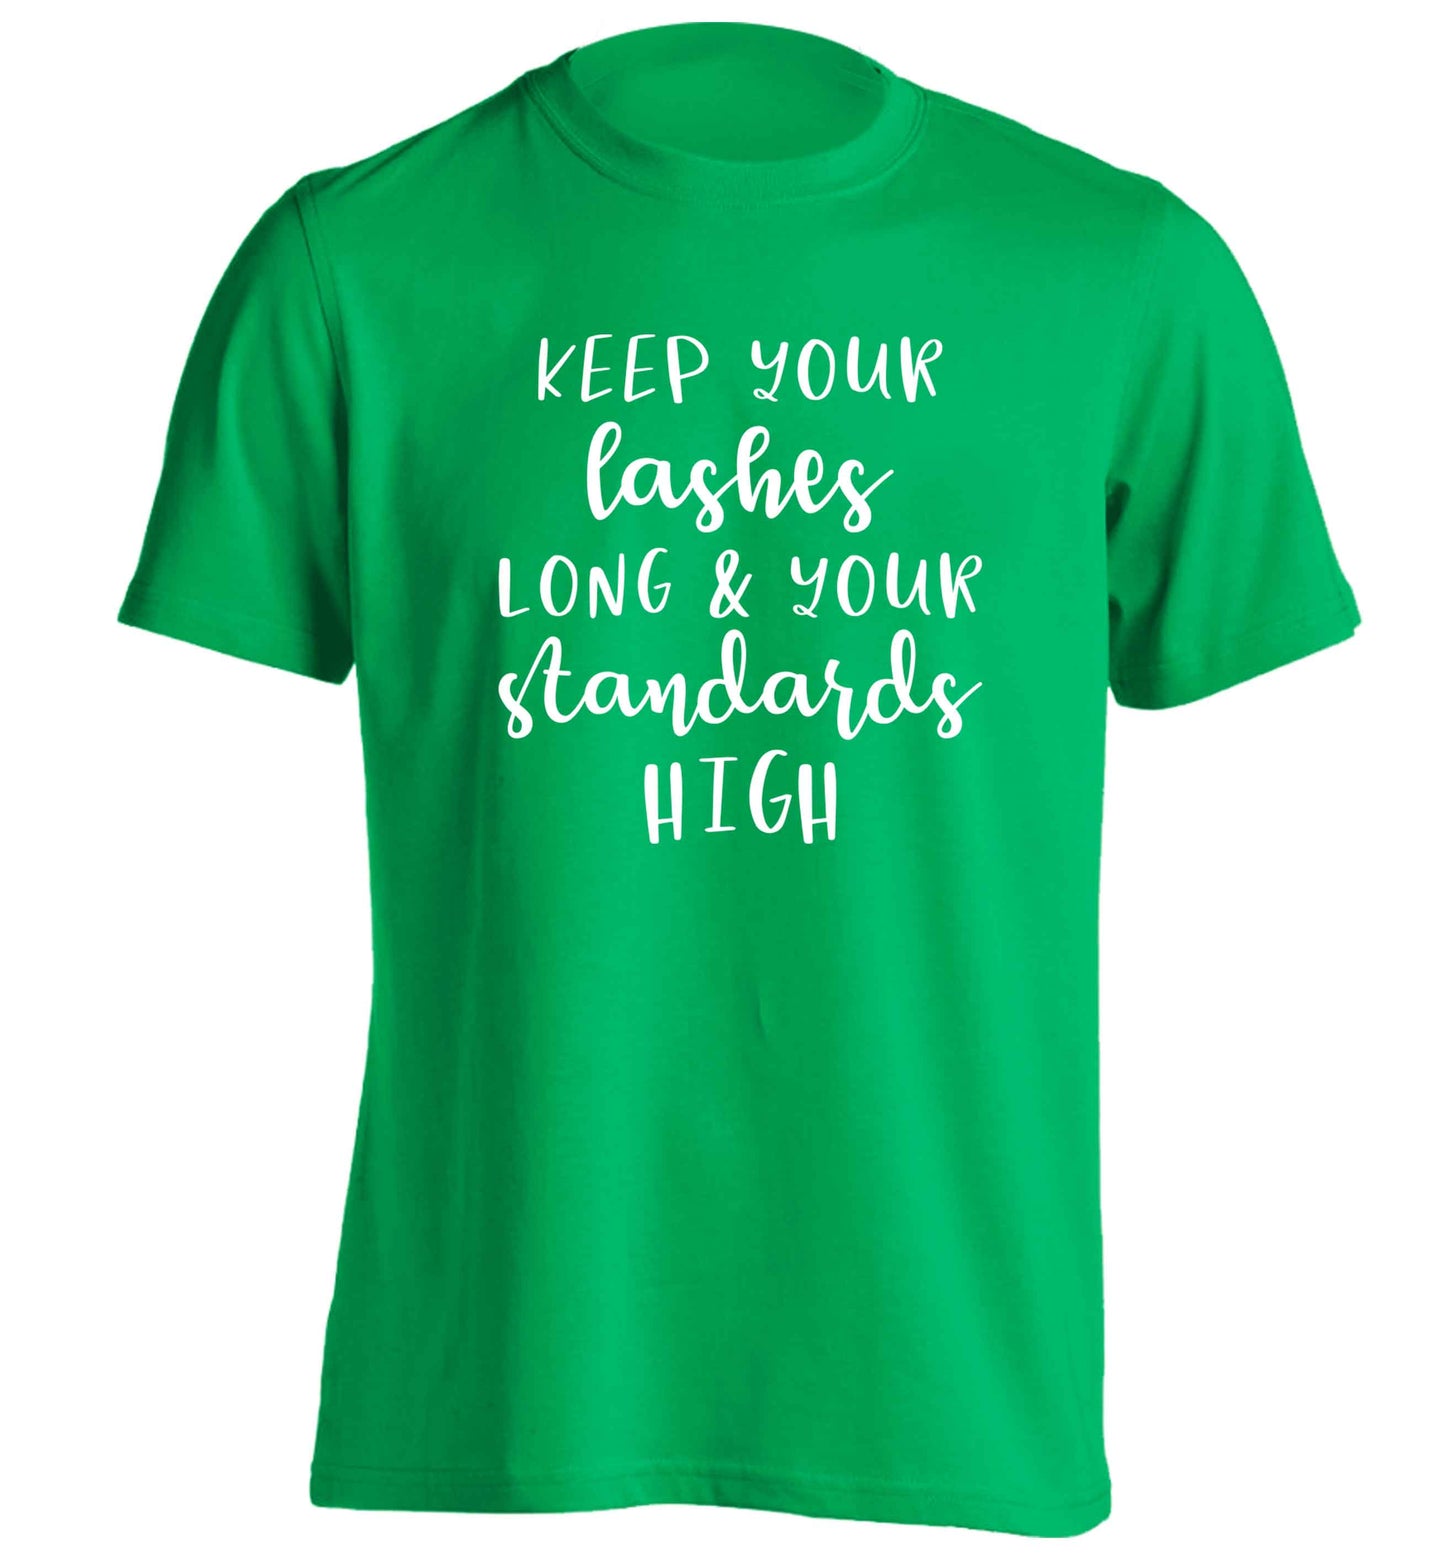 Keep your lashes long and your standards high adults unisex green Tshirt 2XL